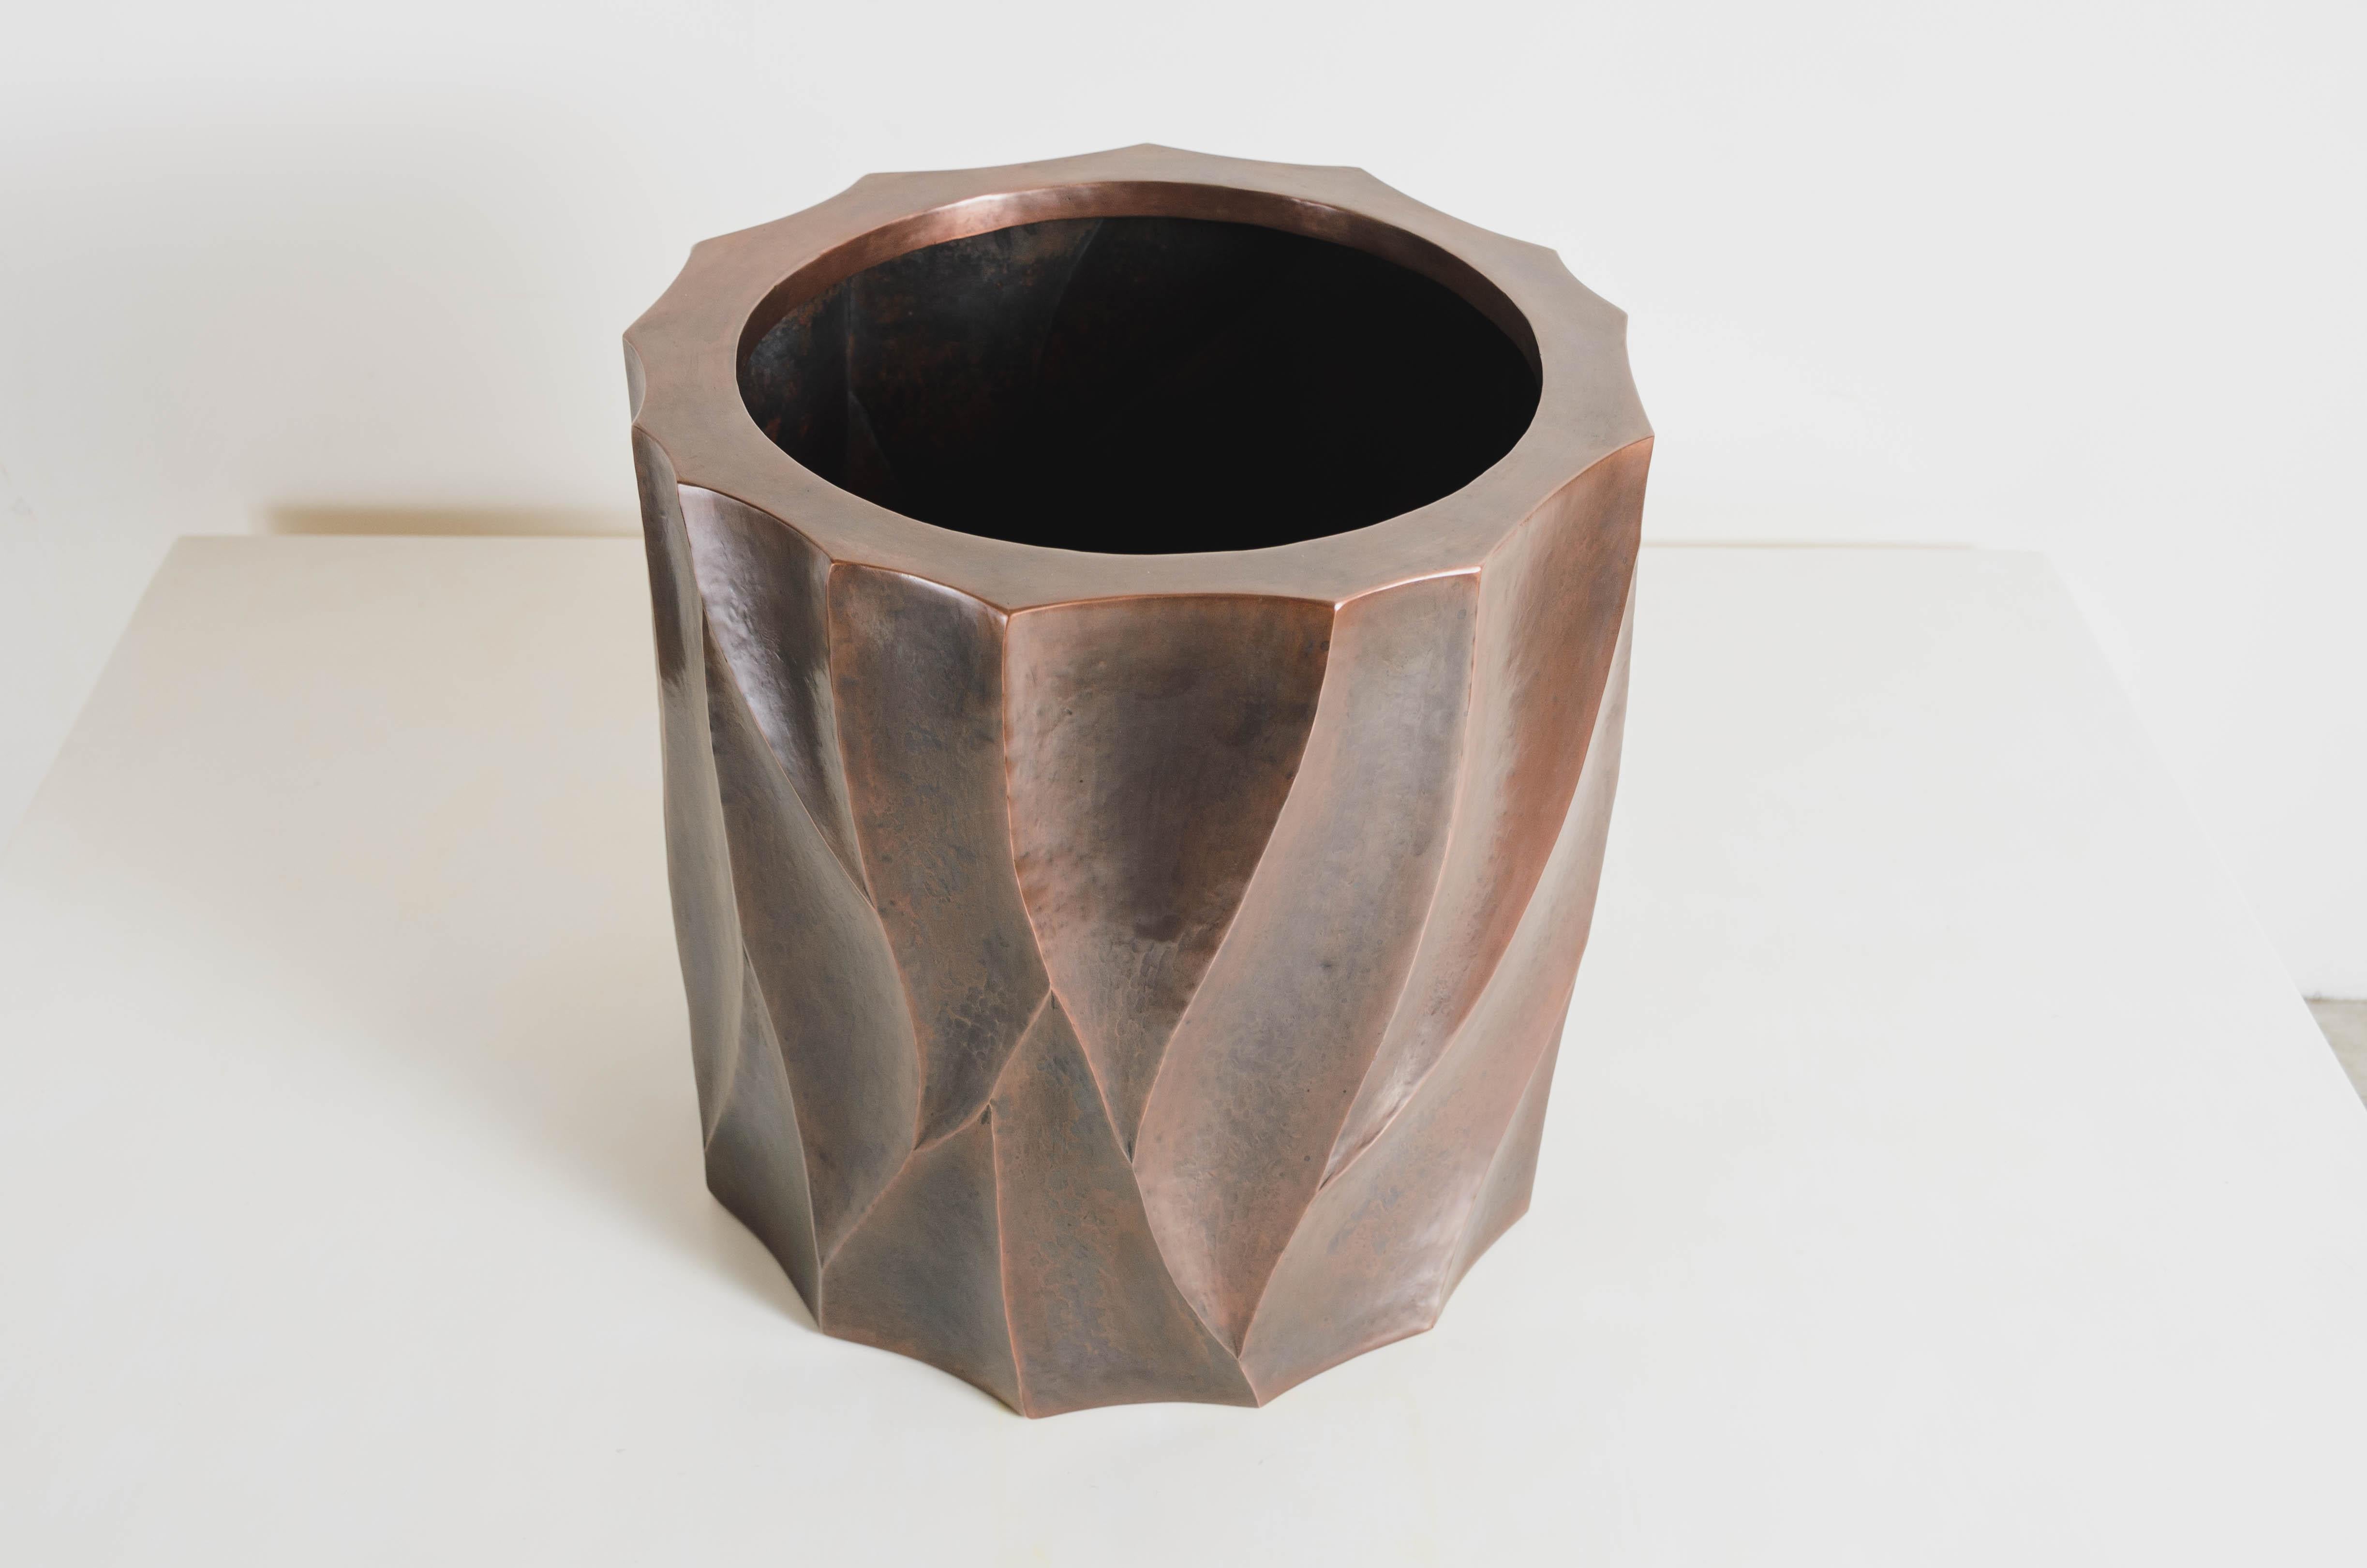 Za Xian Pot
Antique Copper
Hand Repoussé
Limited Edition
Each piece is individually crafted and is unique
Repoussé is the traditional art of hand-hammering decorative relief onto sheet metal. The technique originated around 800 BC between Asia